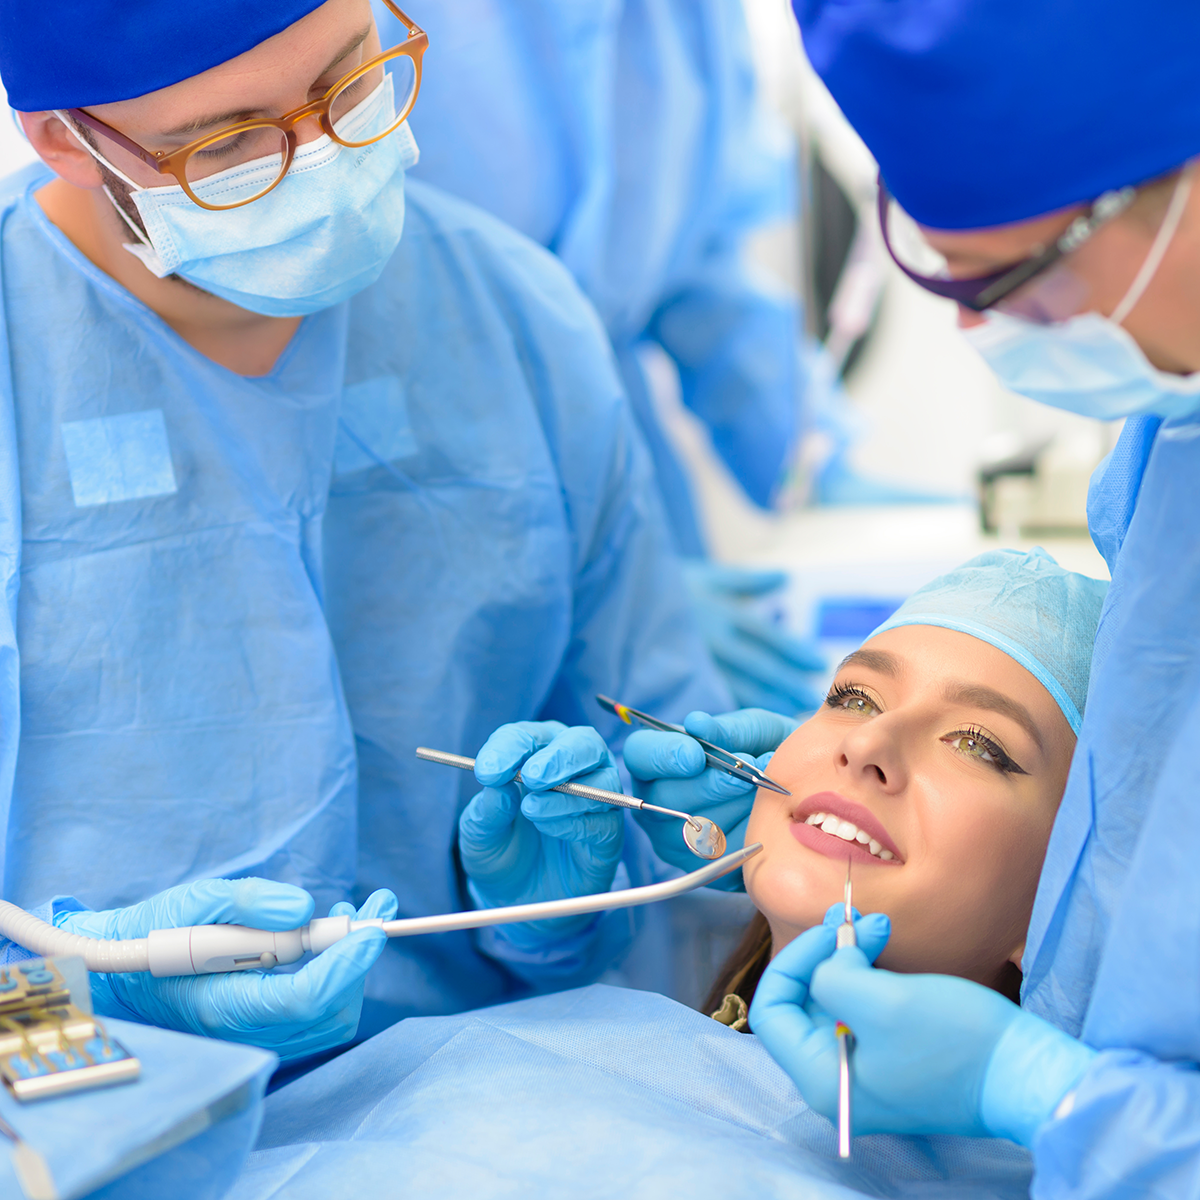 Capture the precision and expertise of an oral surgeon during a complex surgery. This image highlights the focused environment and advanced equipment used in modern oral and maxillofacial surgical practices.